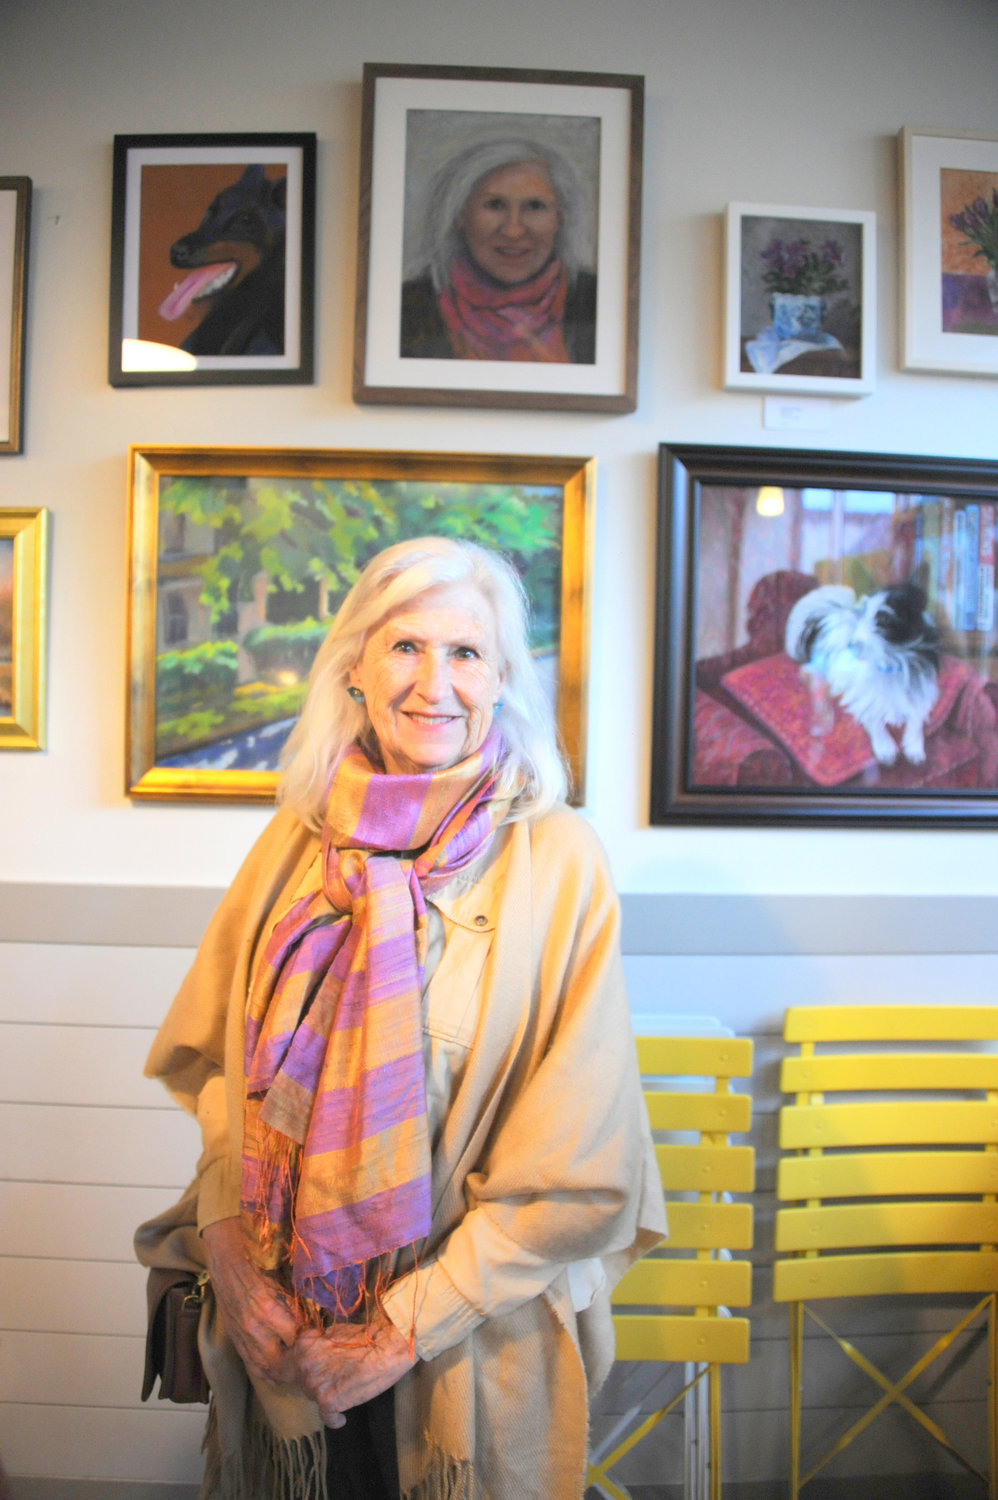 Dee Dee Bowman stands under her portrait painted by
Beverlee Ciccone.